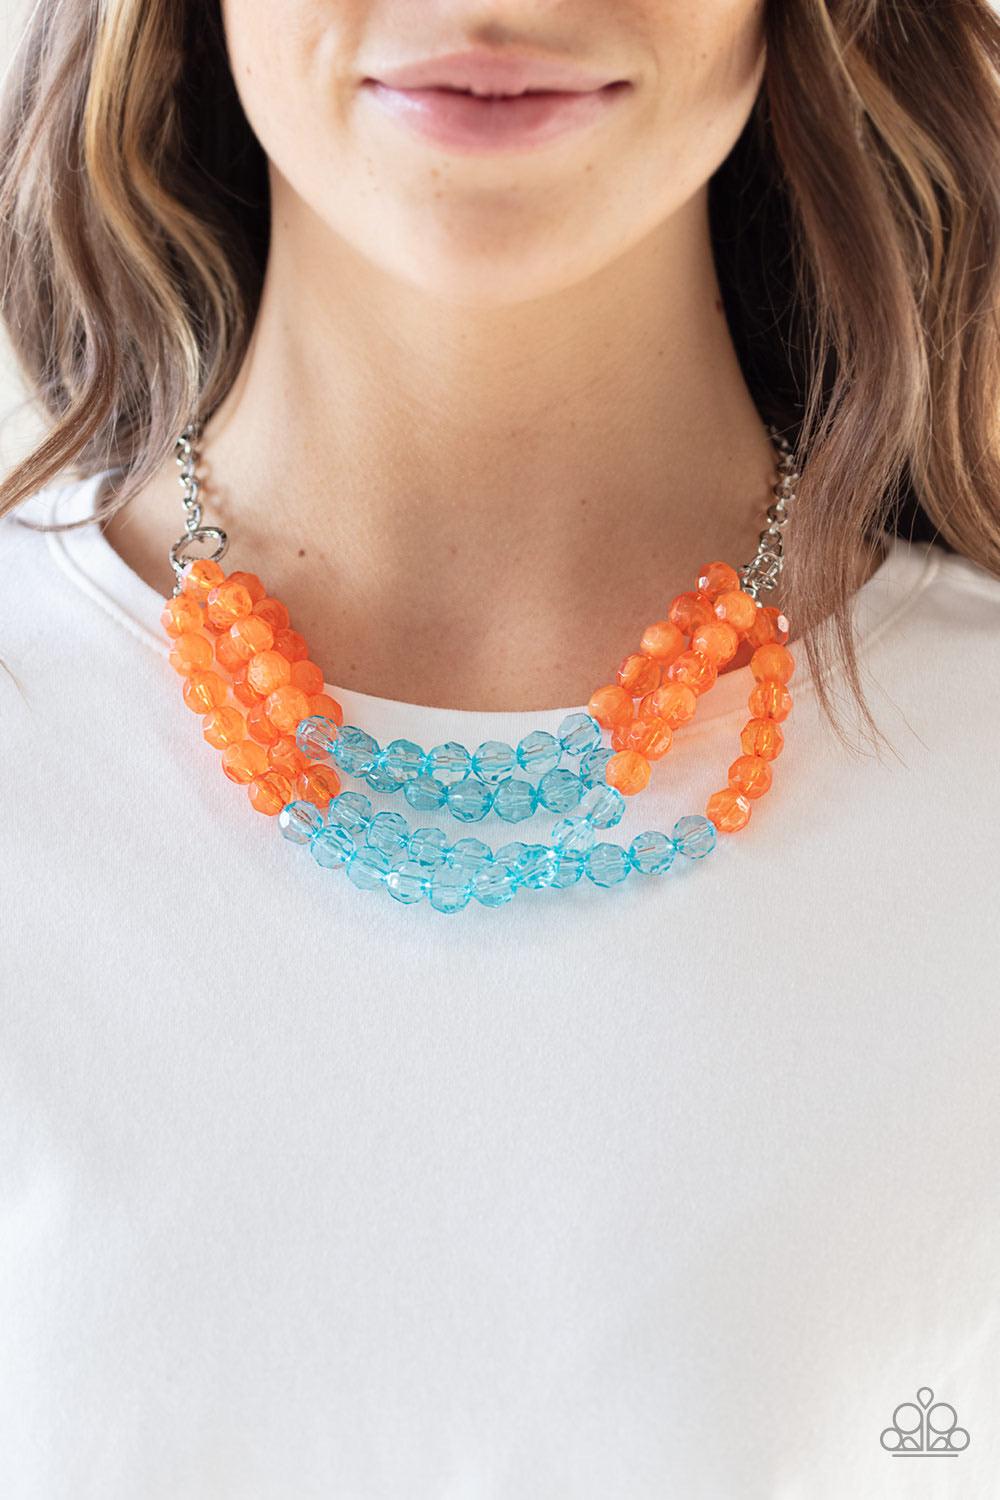 Paparazzi Accessories Summer Ice - Orange Featuring cloudy and glassy finishes, strands of faceted orange and blue crystal-like beads alternate below the collar, creating colorfully icy layers. Features an adjustable clasp closure. Jewelry